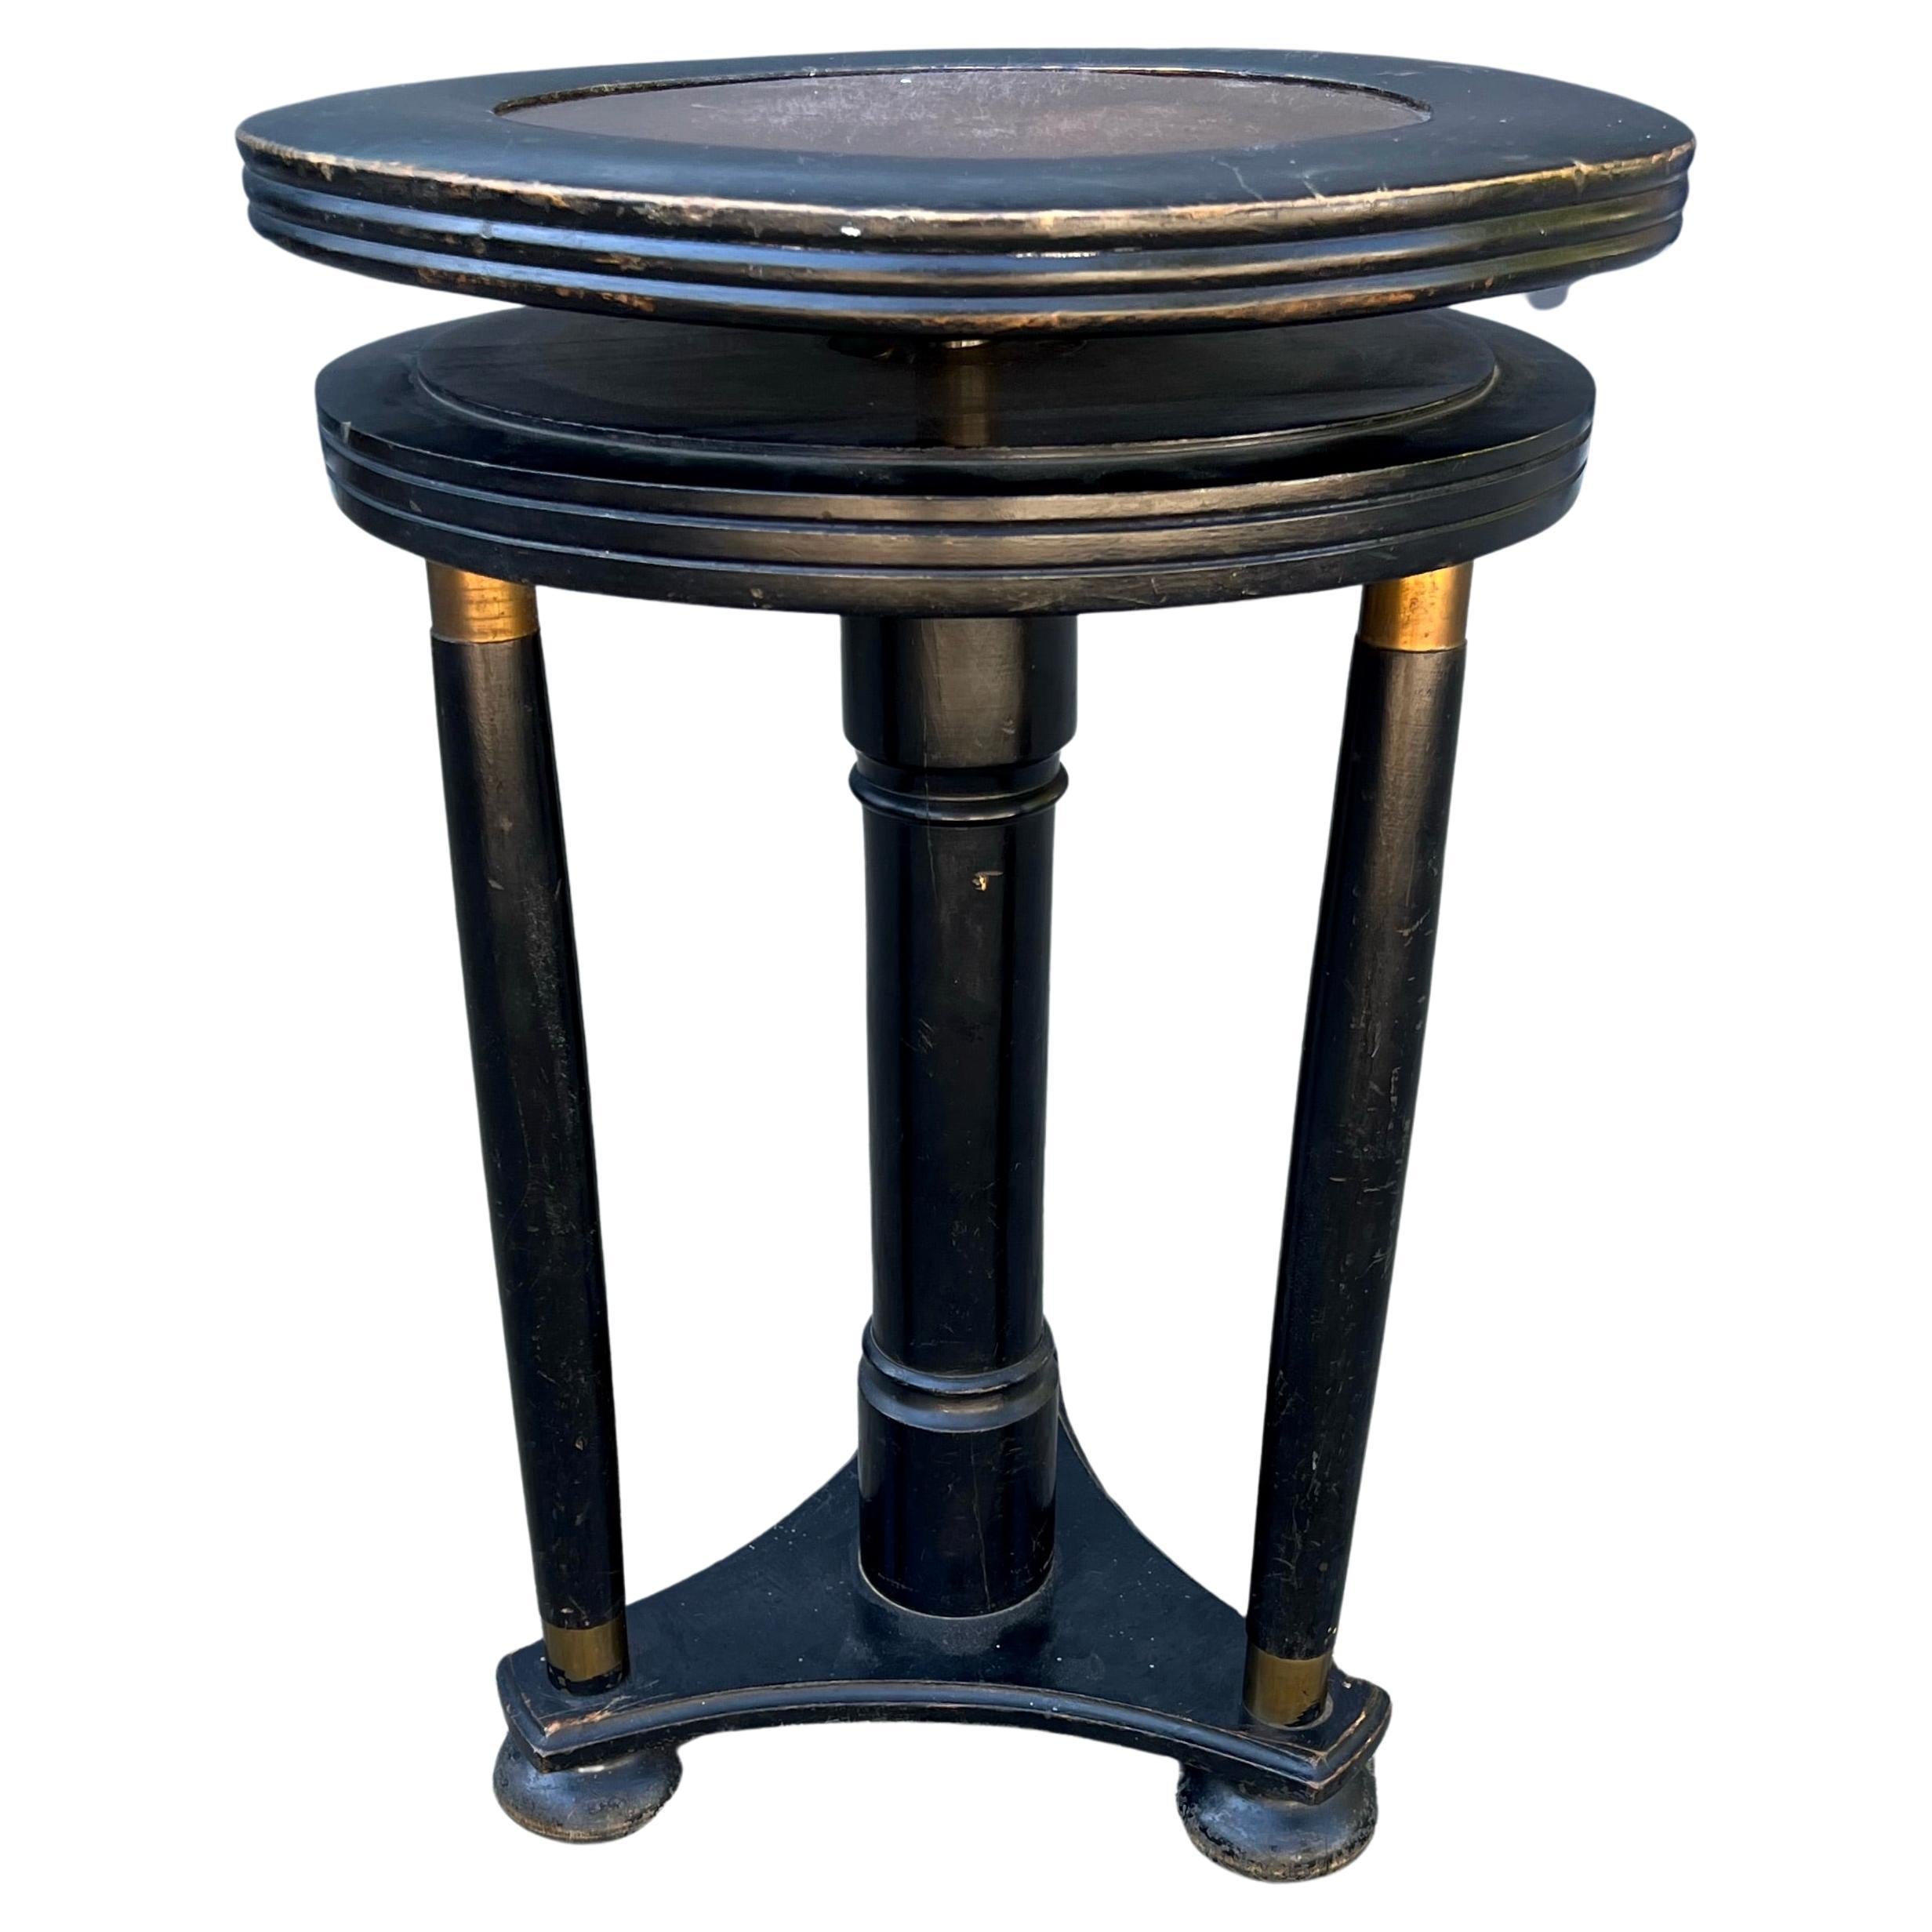 Stylish Blackened Wooden and Brass Art Deco Desk or Piano Swivel Stool, ca 1900 For Sale